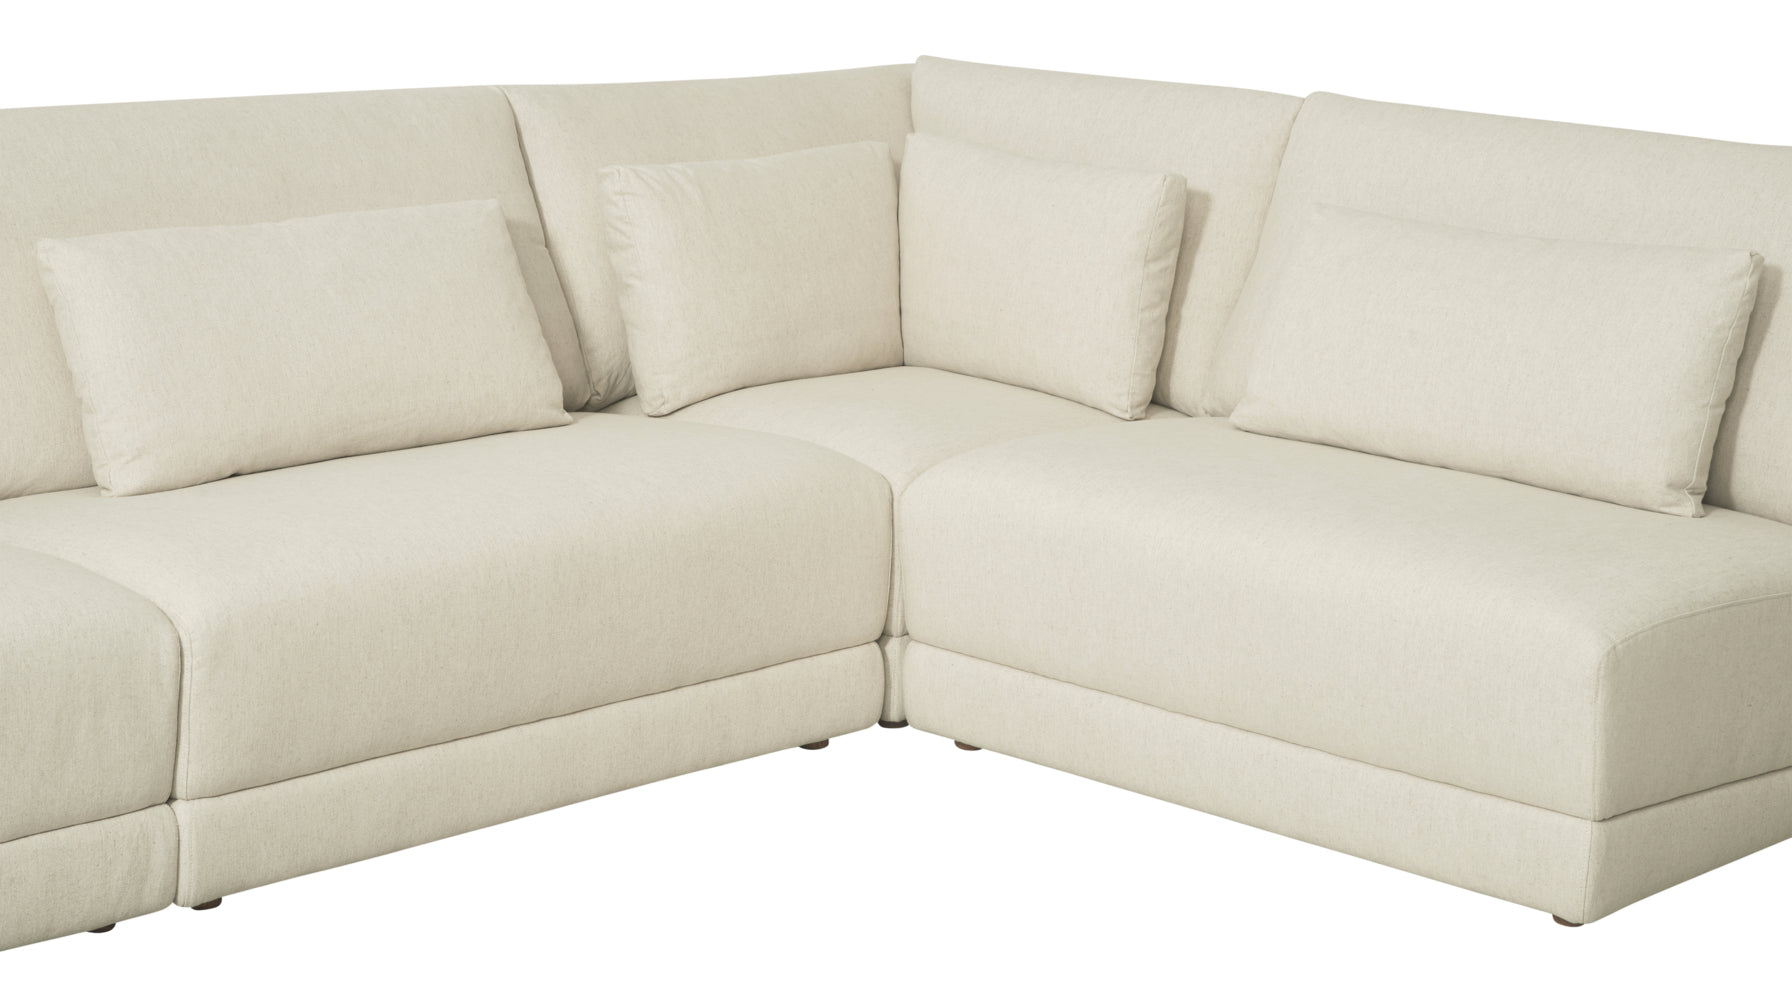 Wind Down 4-Piece Modular Sectional, Right, Beach - Image 6